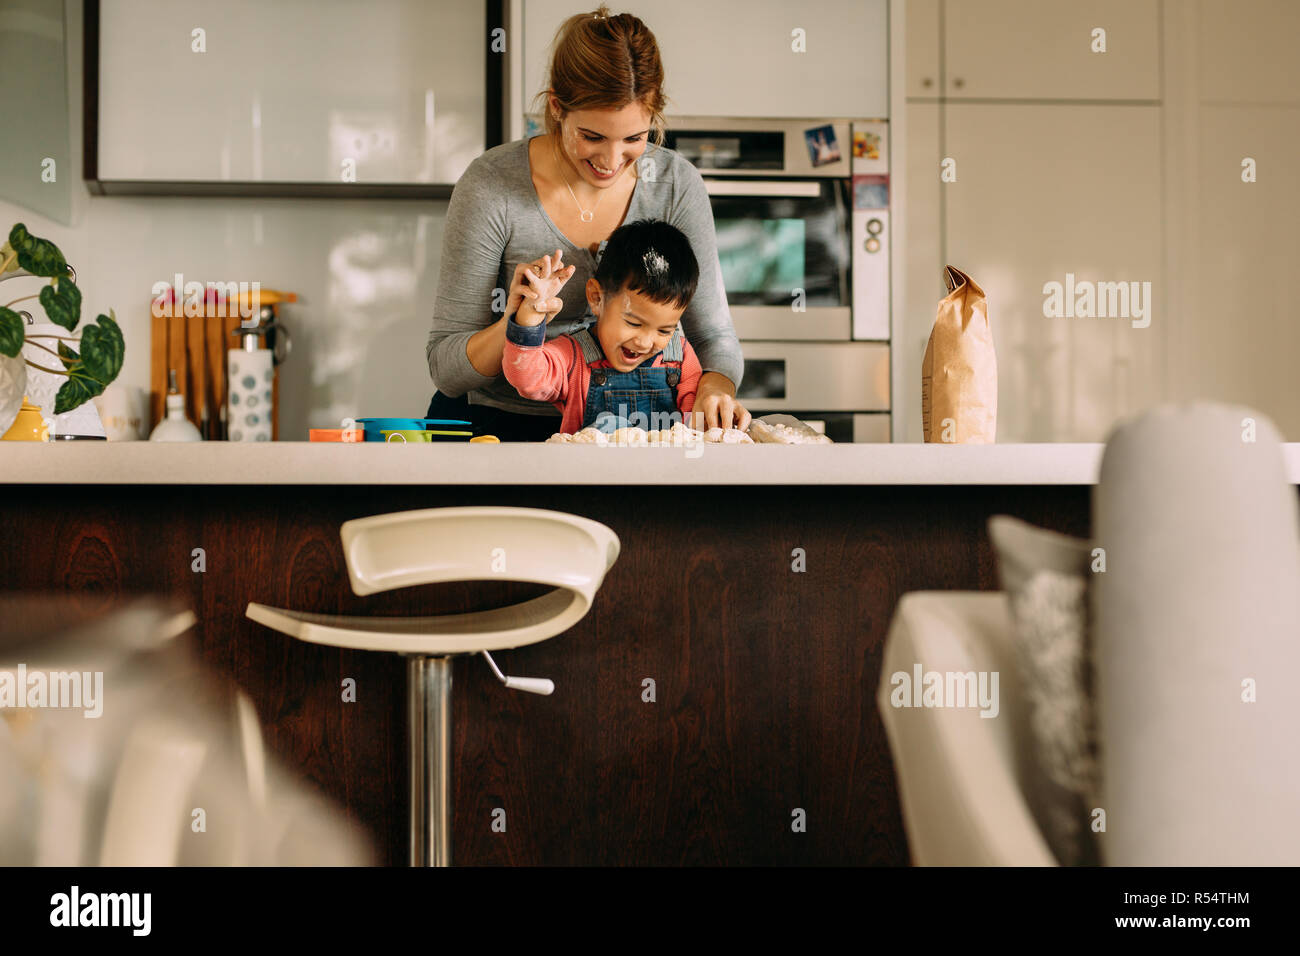 Cheerful little boy enjoying with mother making cookie in kitchen. Mother and son having fun while making cookies at home. Stock Photo